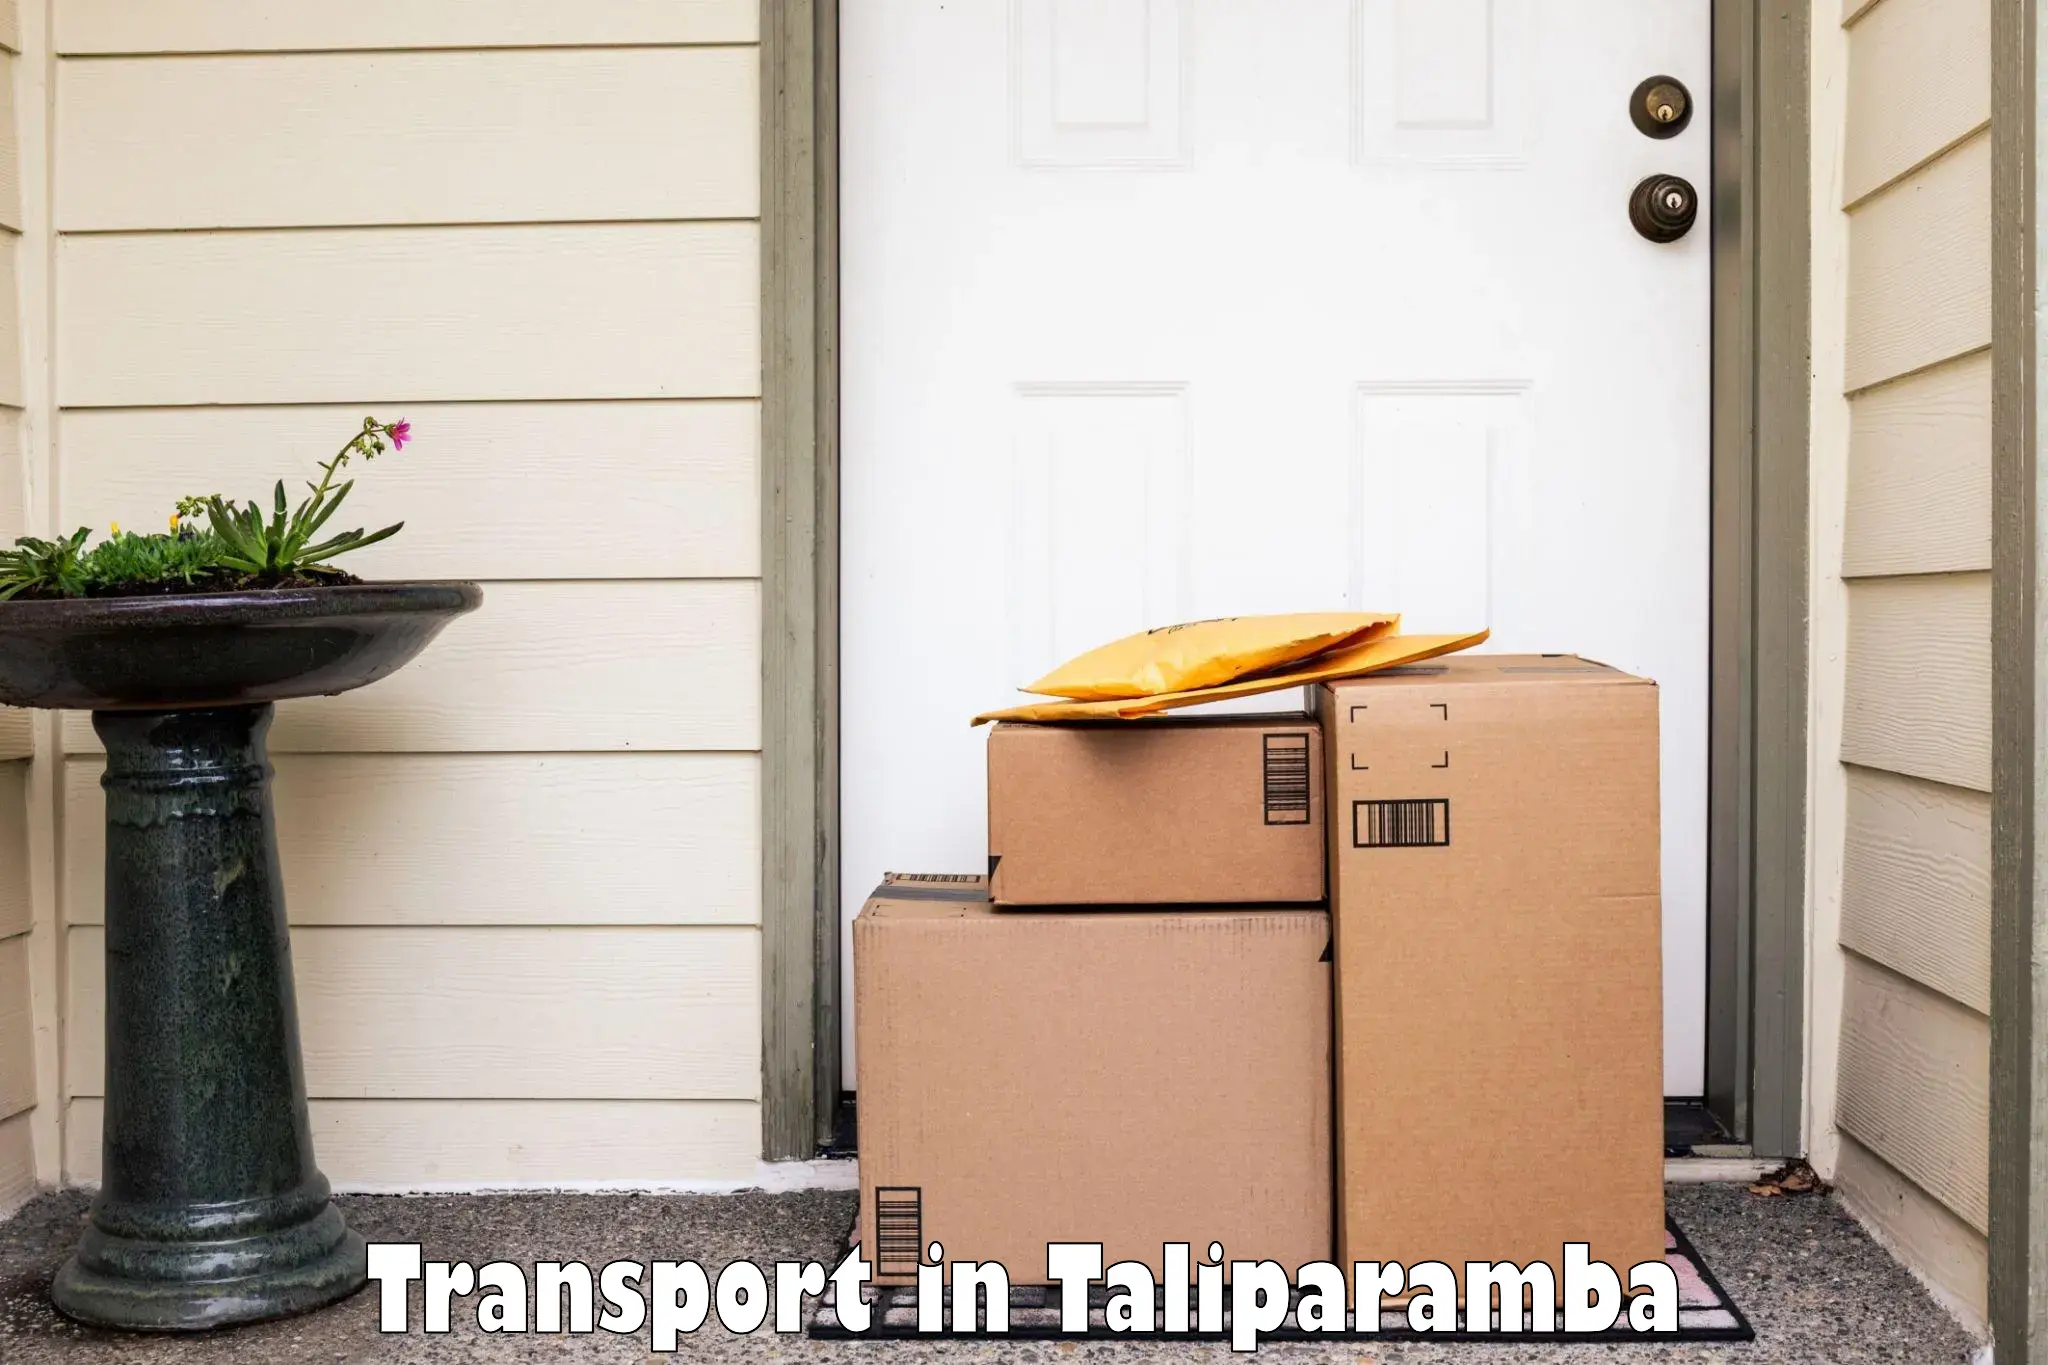 Parcel transport services in Taliparamba